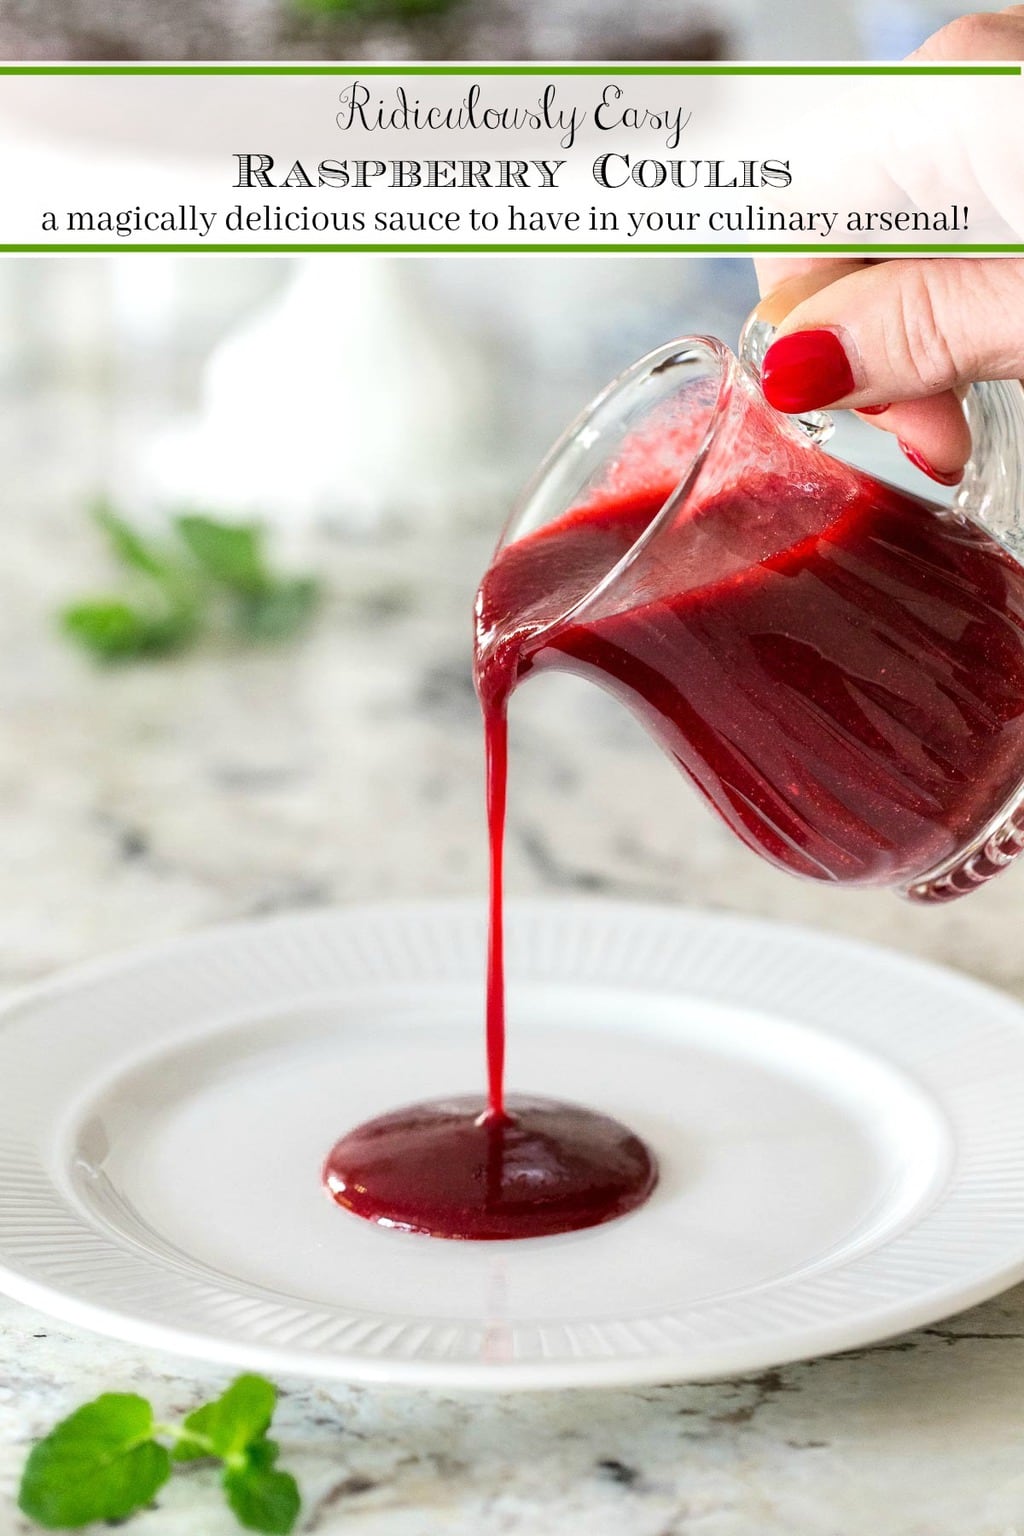 Ridiculously Easy Raspberry Coulis